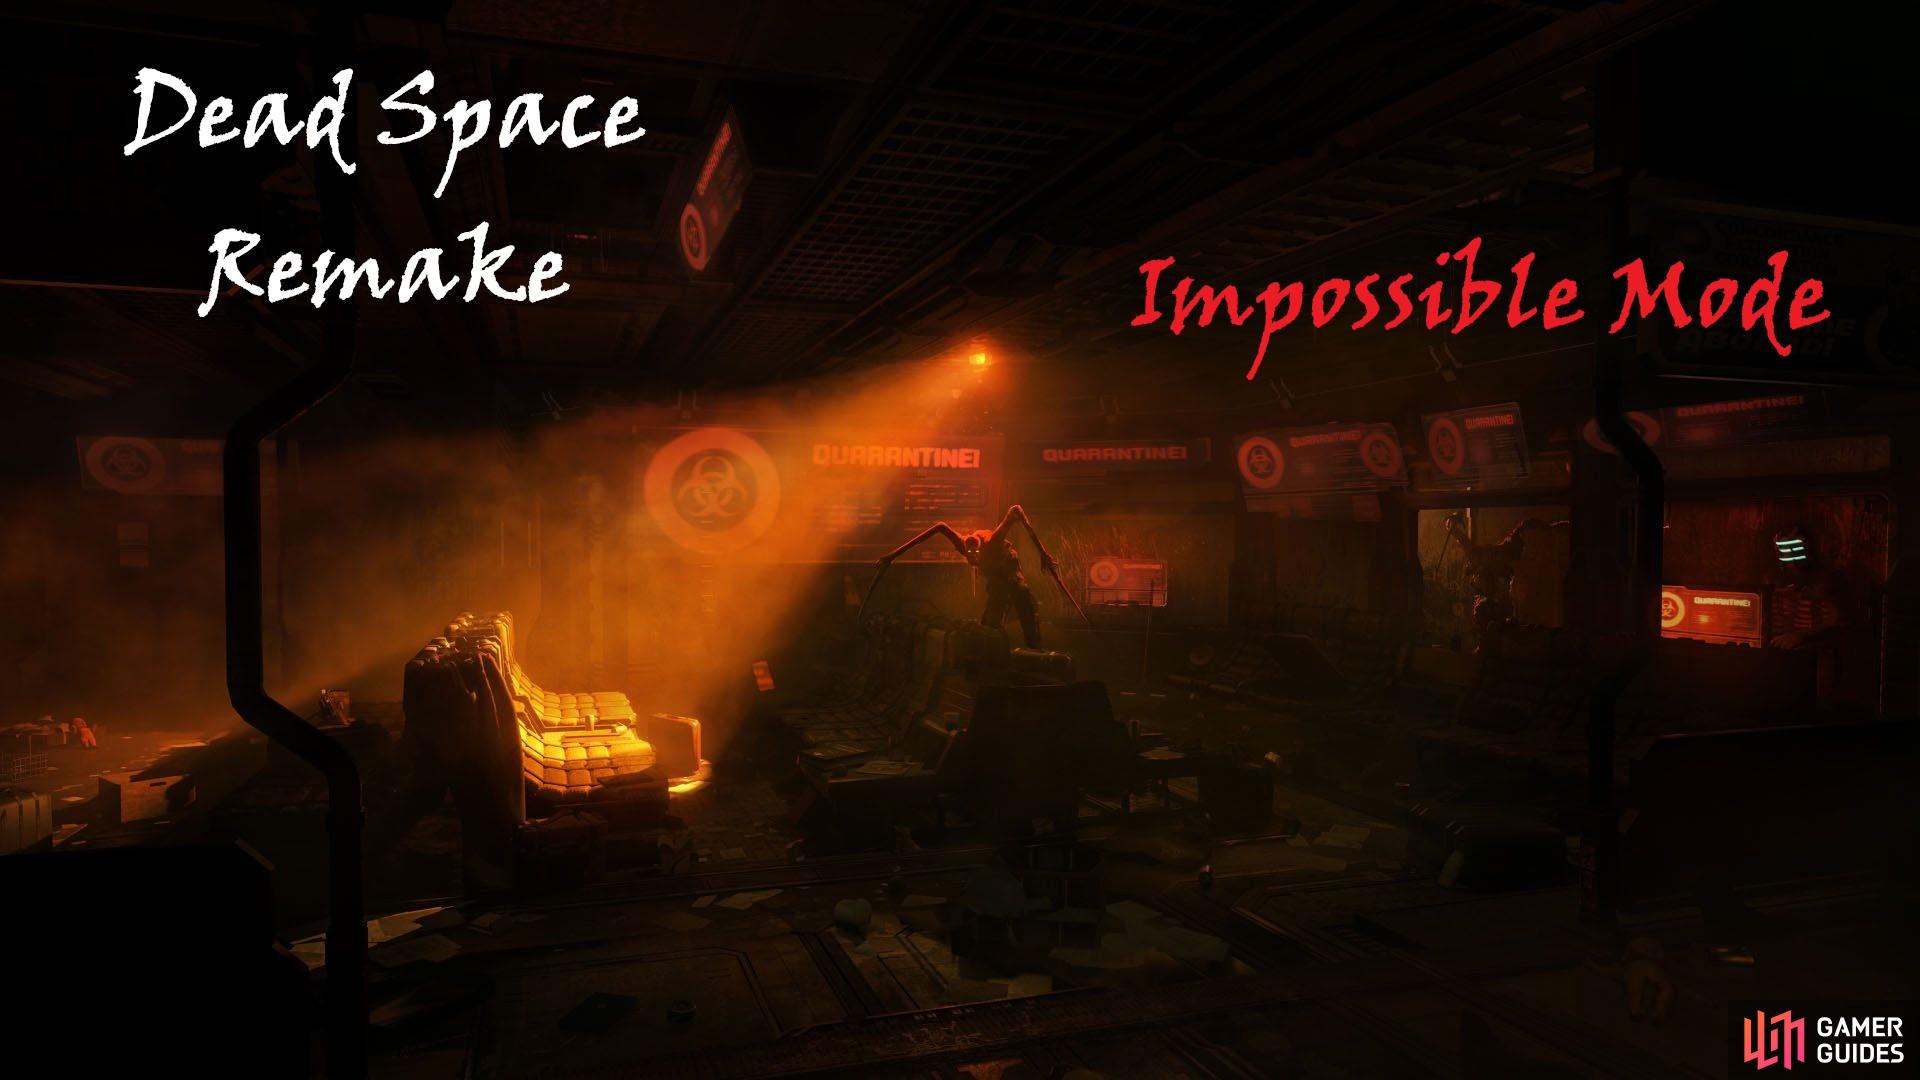 Impossible Mode, Dead Space Remake.